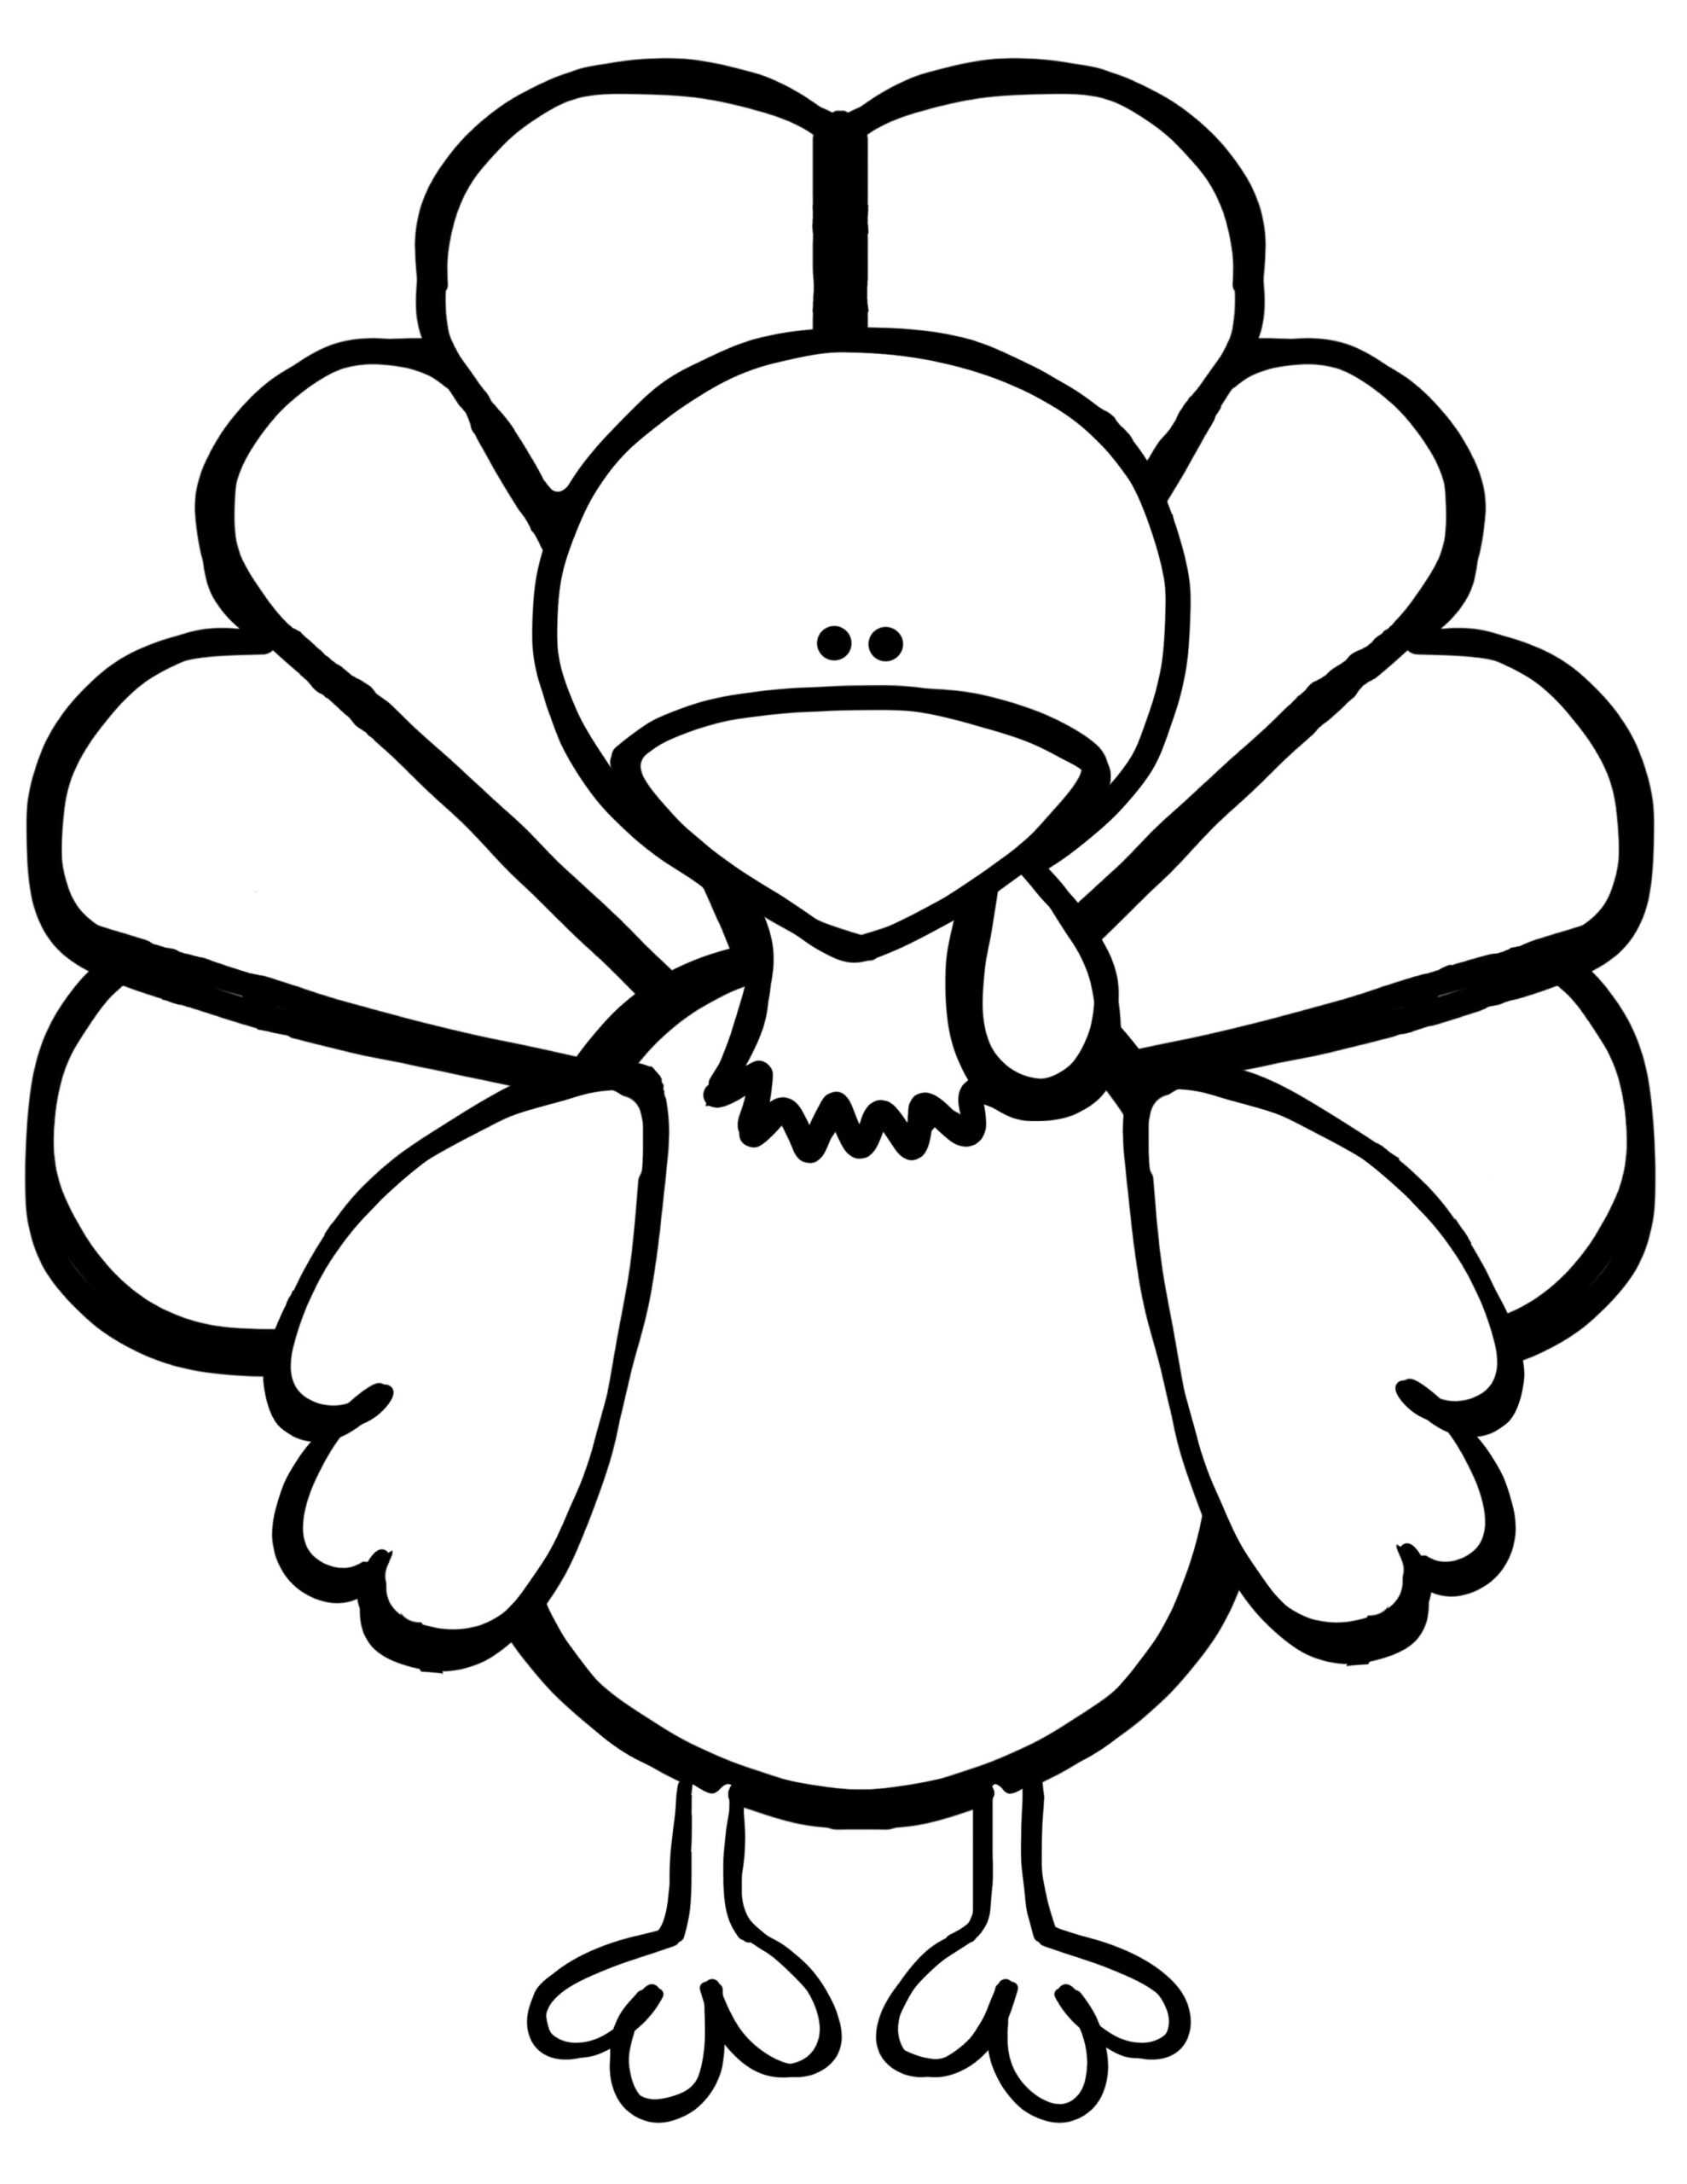 Turkey Template In Disguise Printable Project Free Thankful Craft